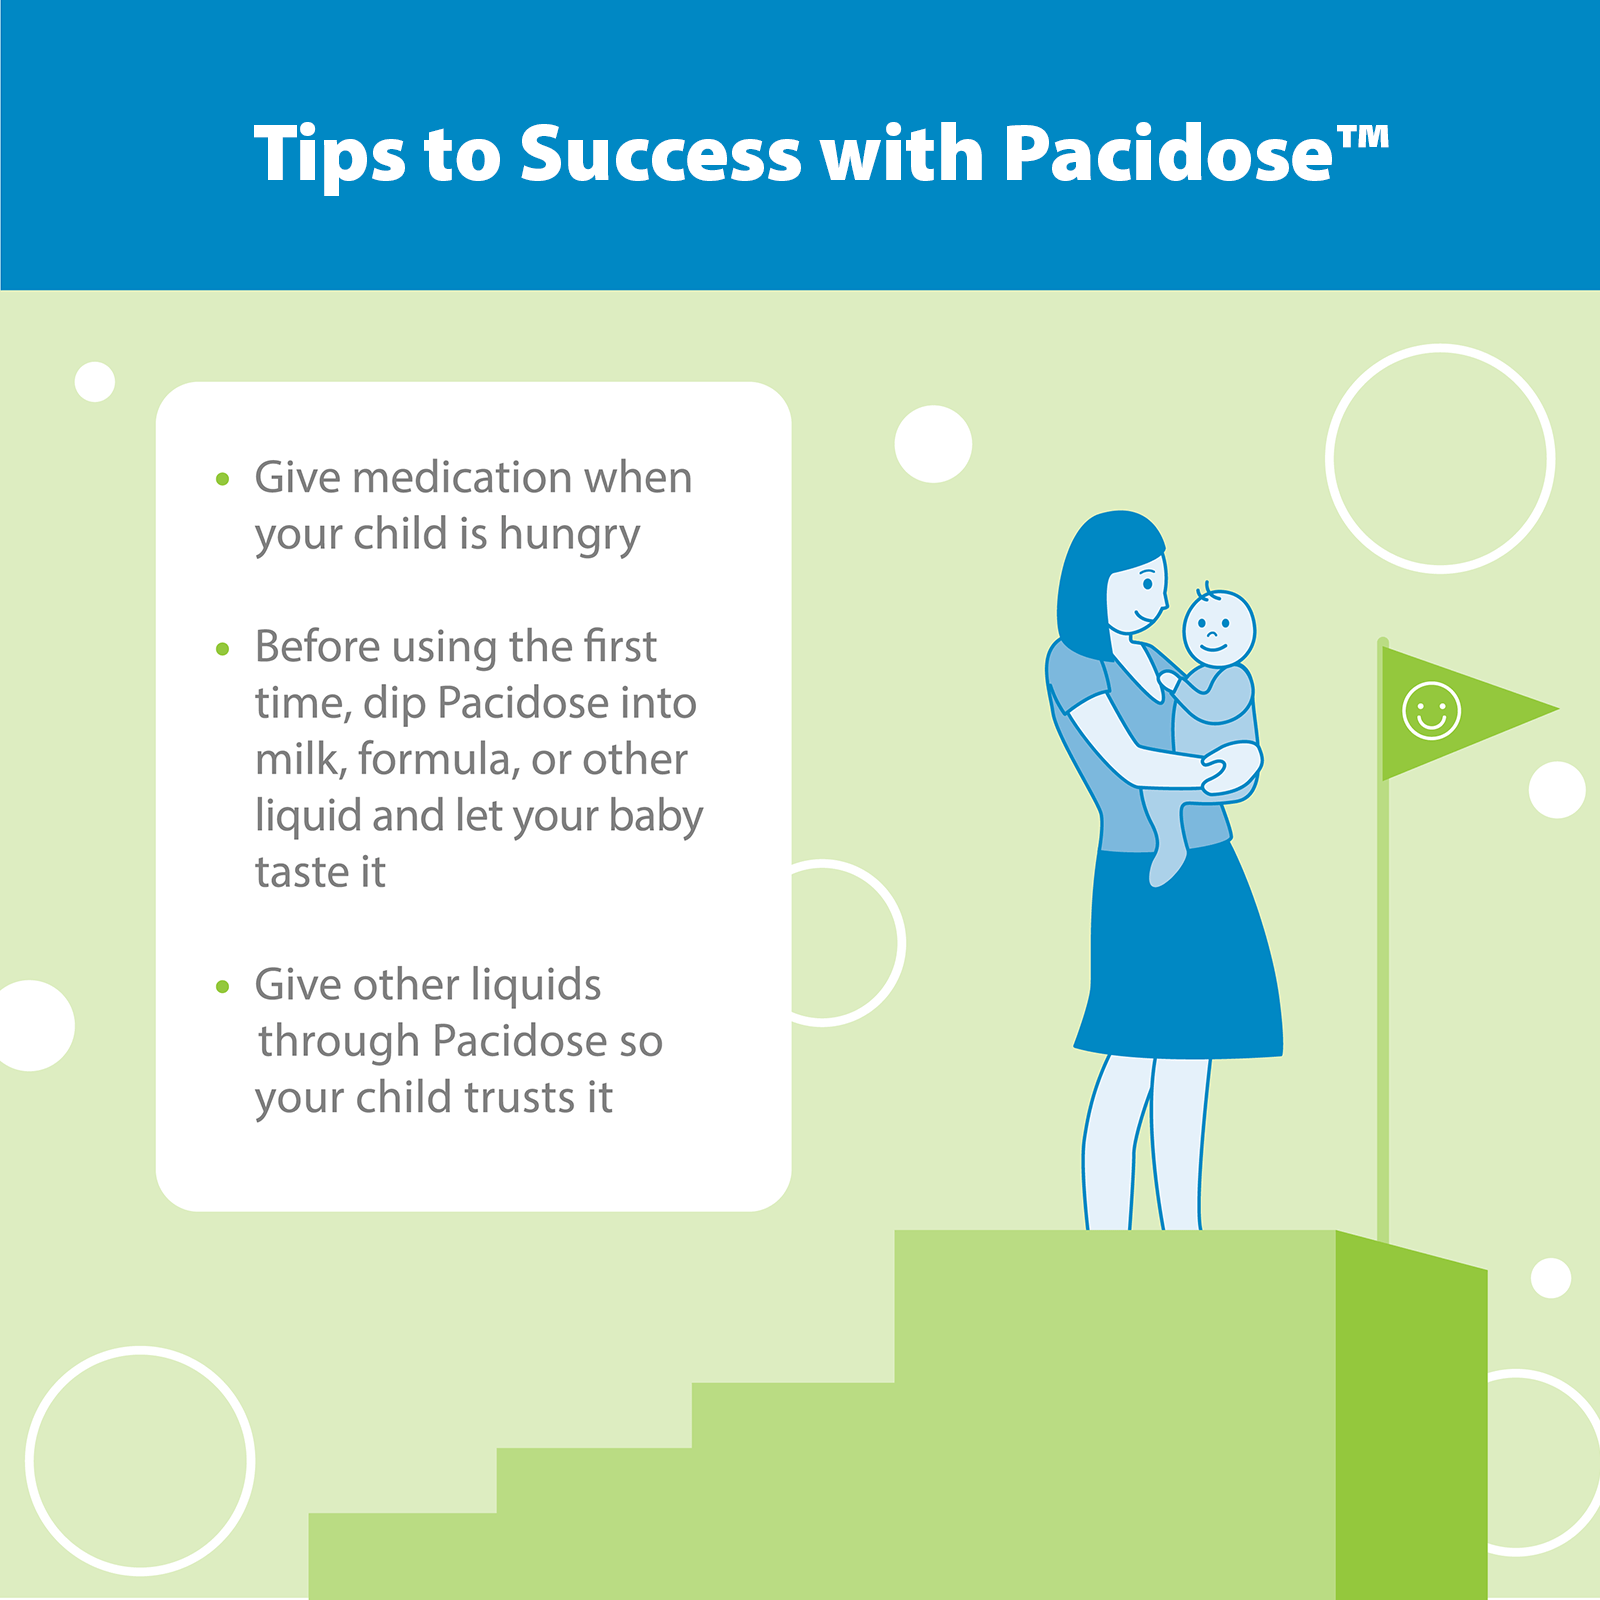 Tips to Success Give medication when your child is hungry. Before using the first time, dip Pacidose into milk, formula, or other liquid and let your baby taste it. Give other liquids through Pacidose so your child trusts it.